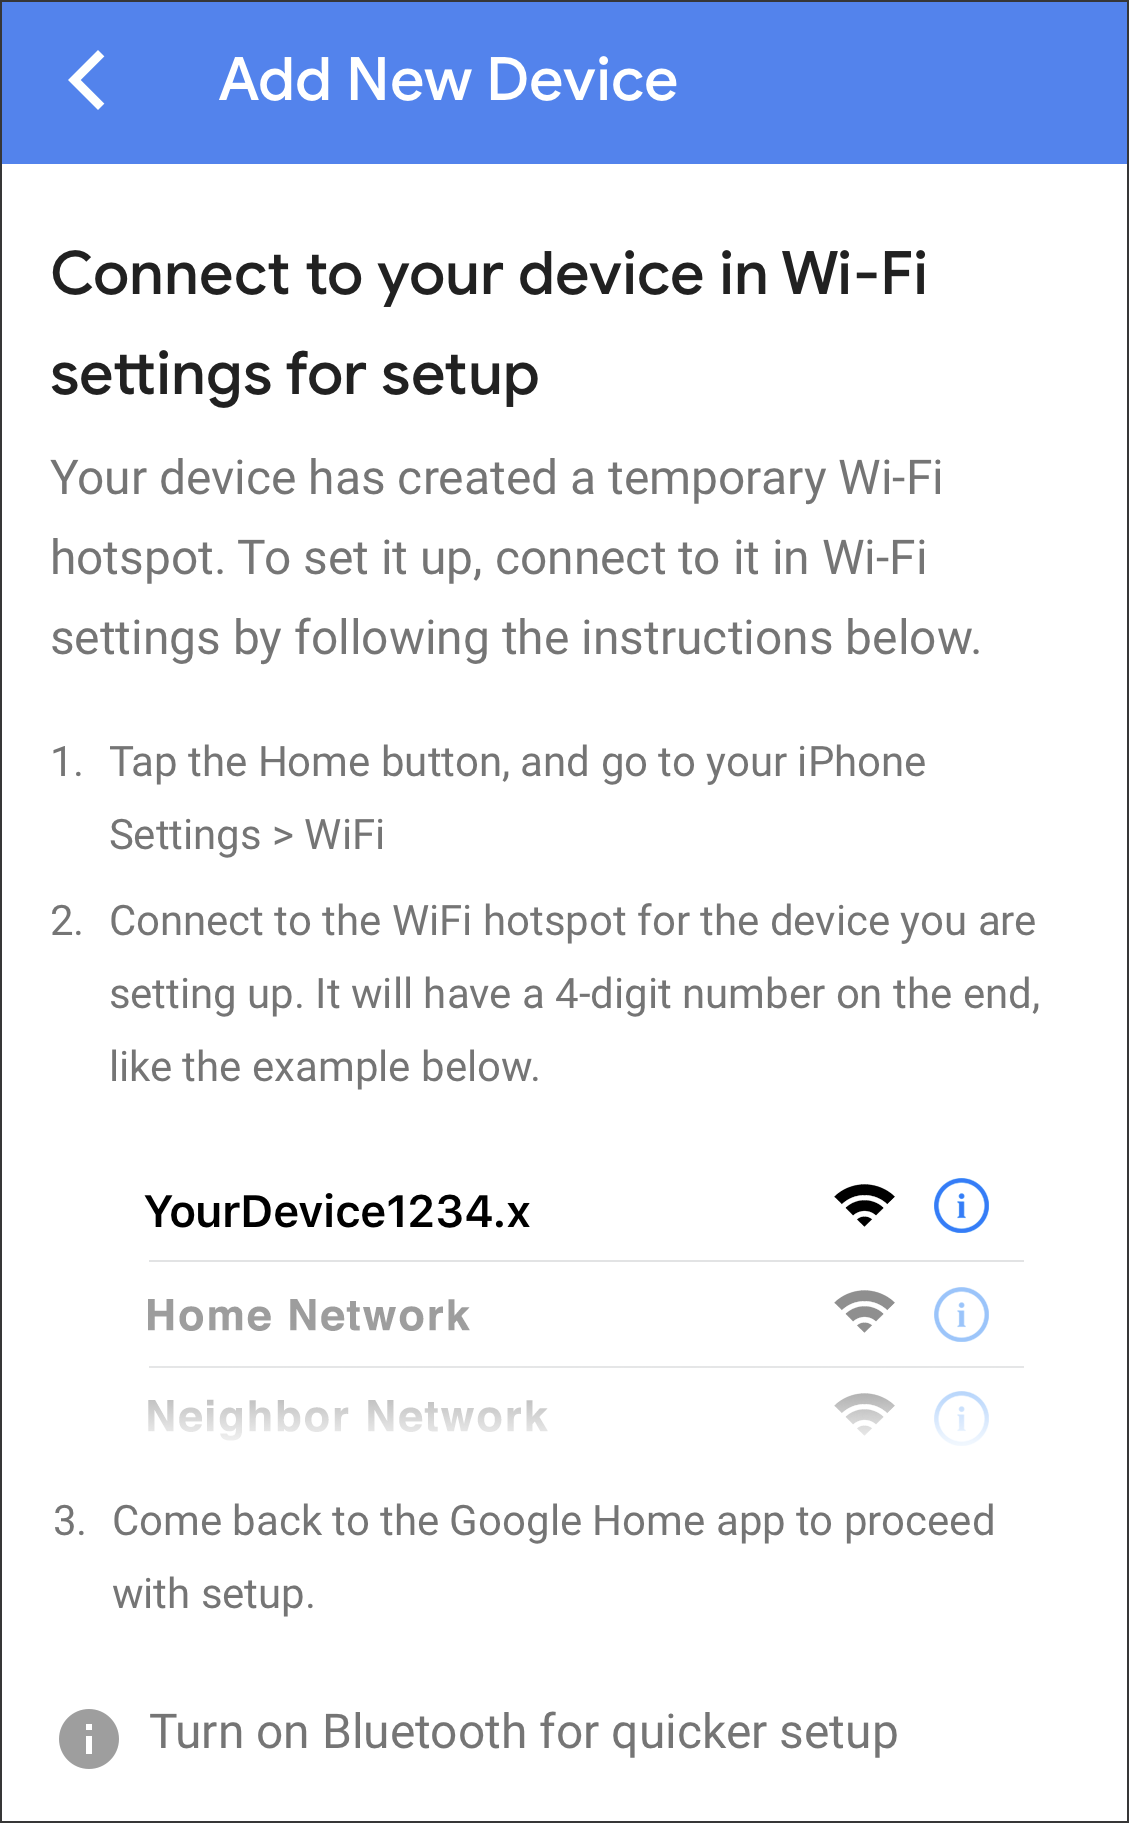 how does google home mini work with iphone